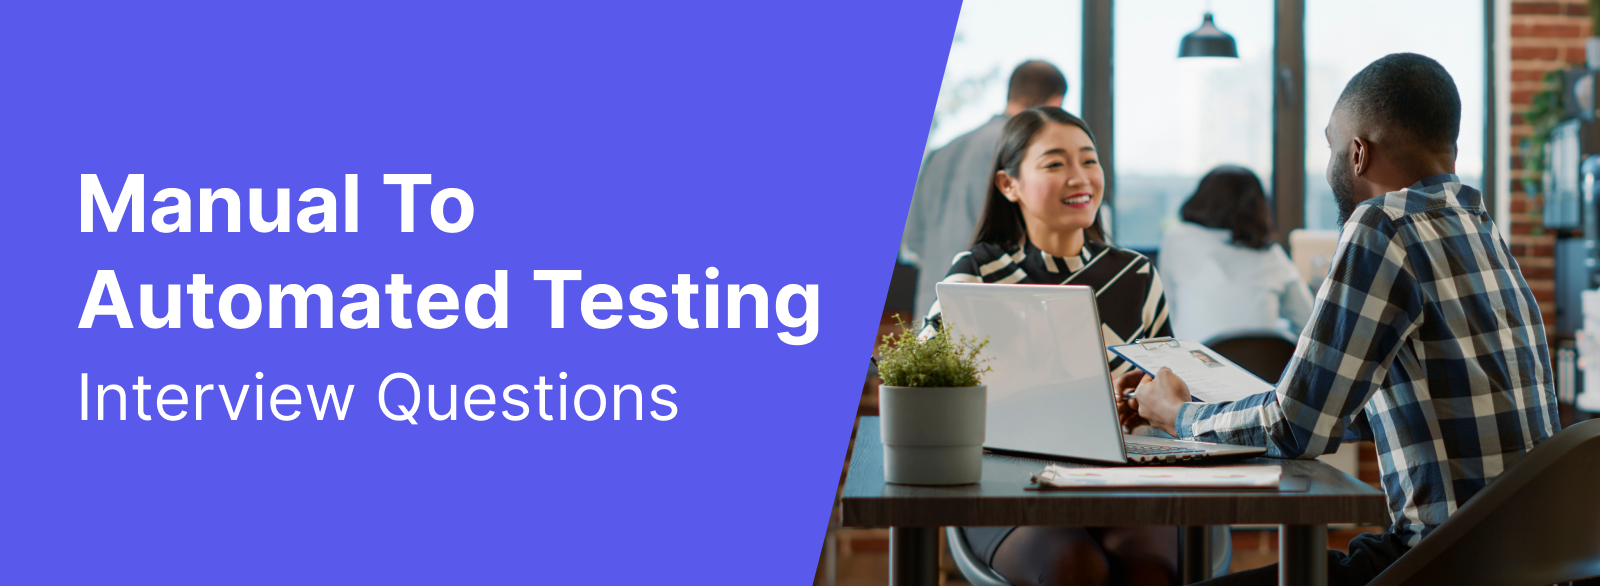 manual to automated testing interview questions